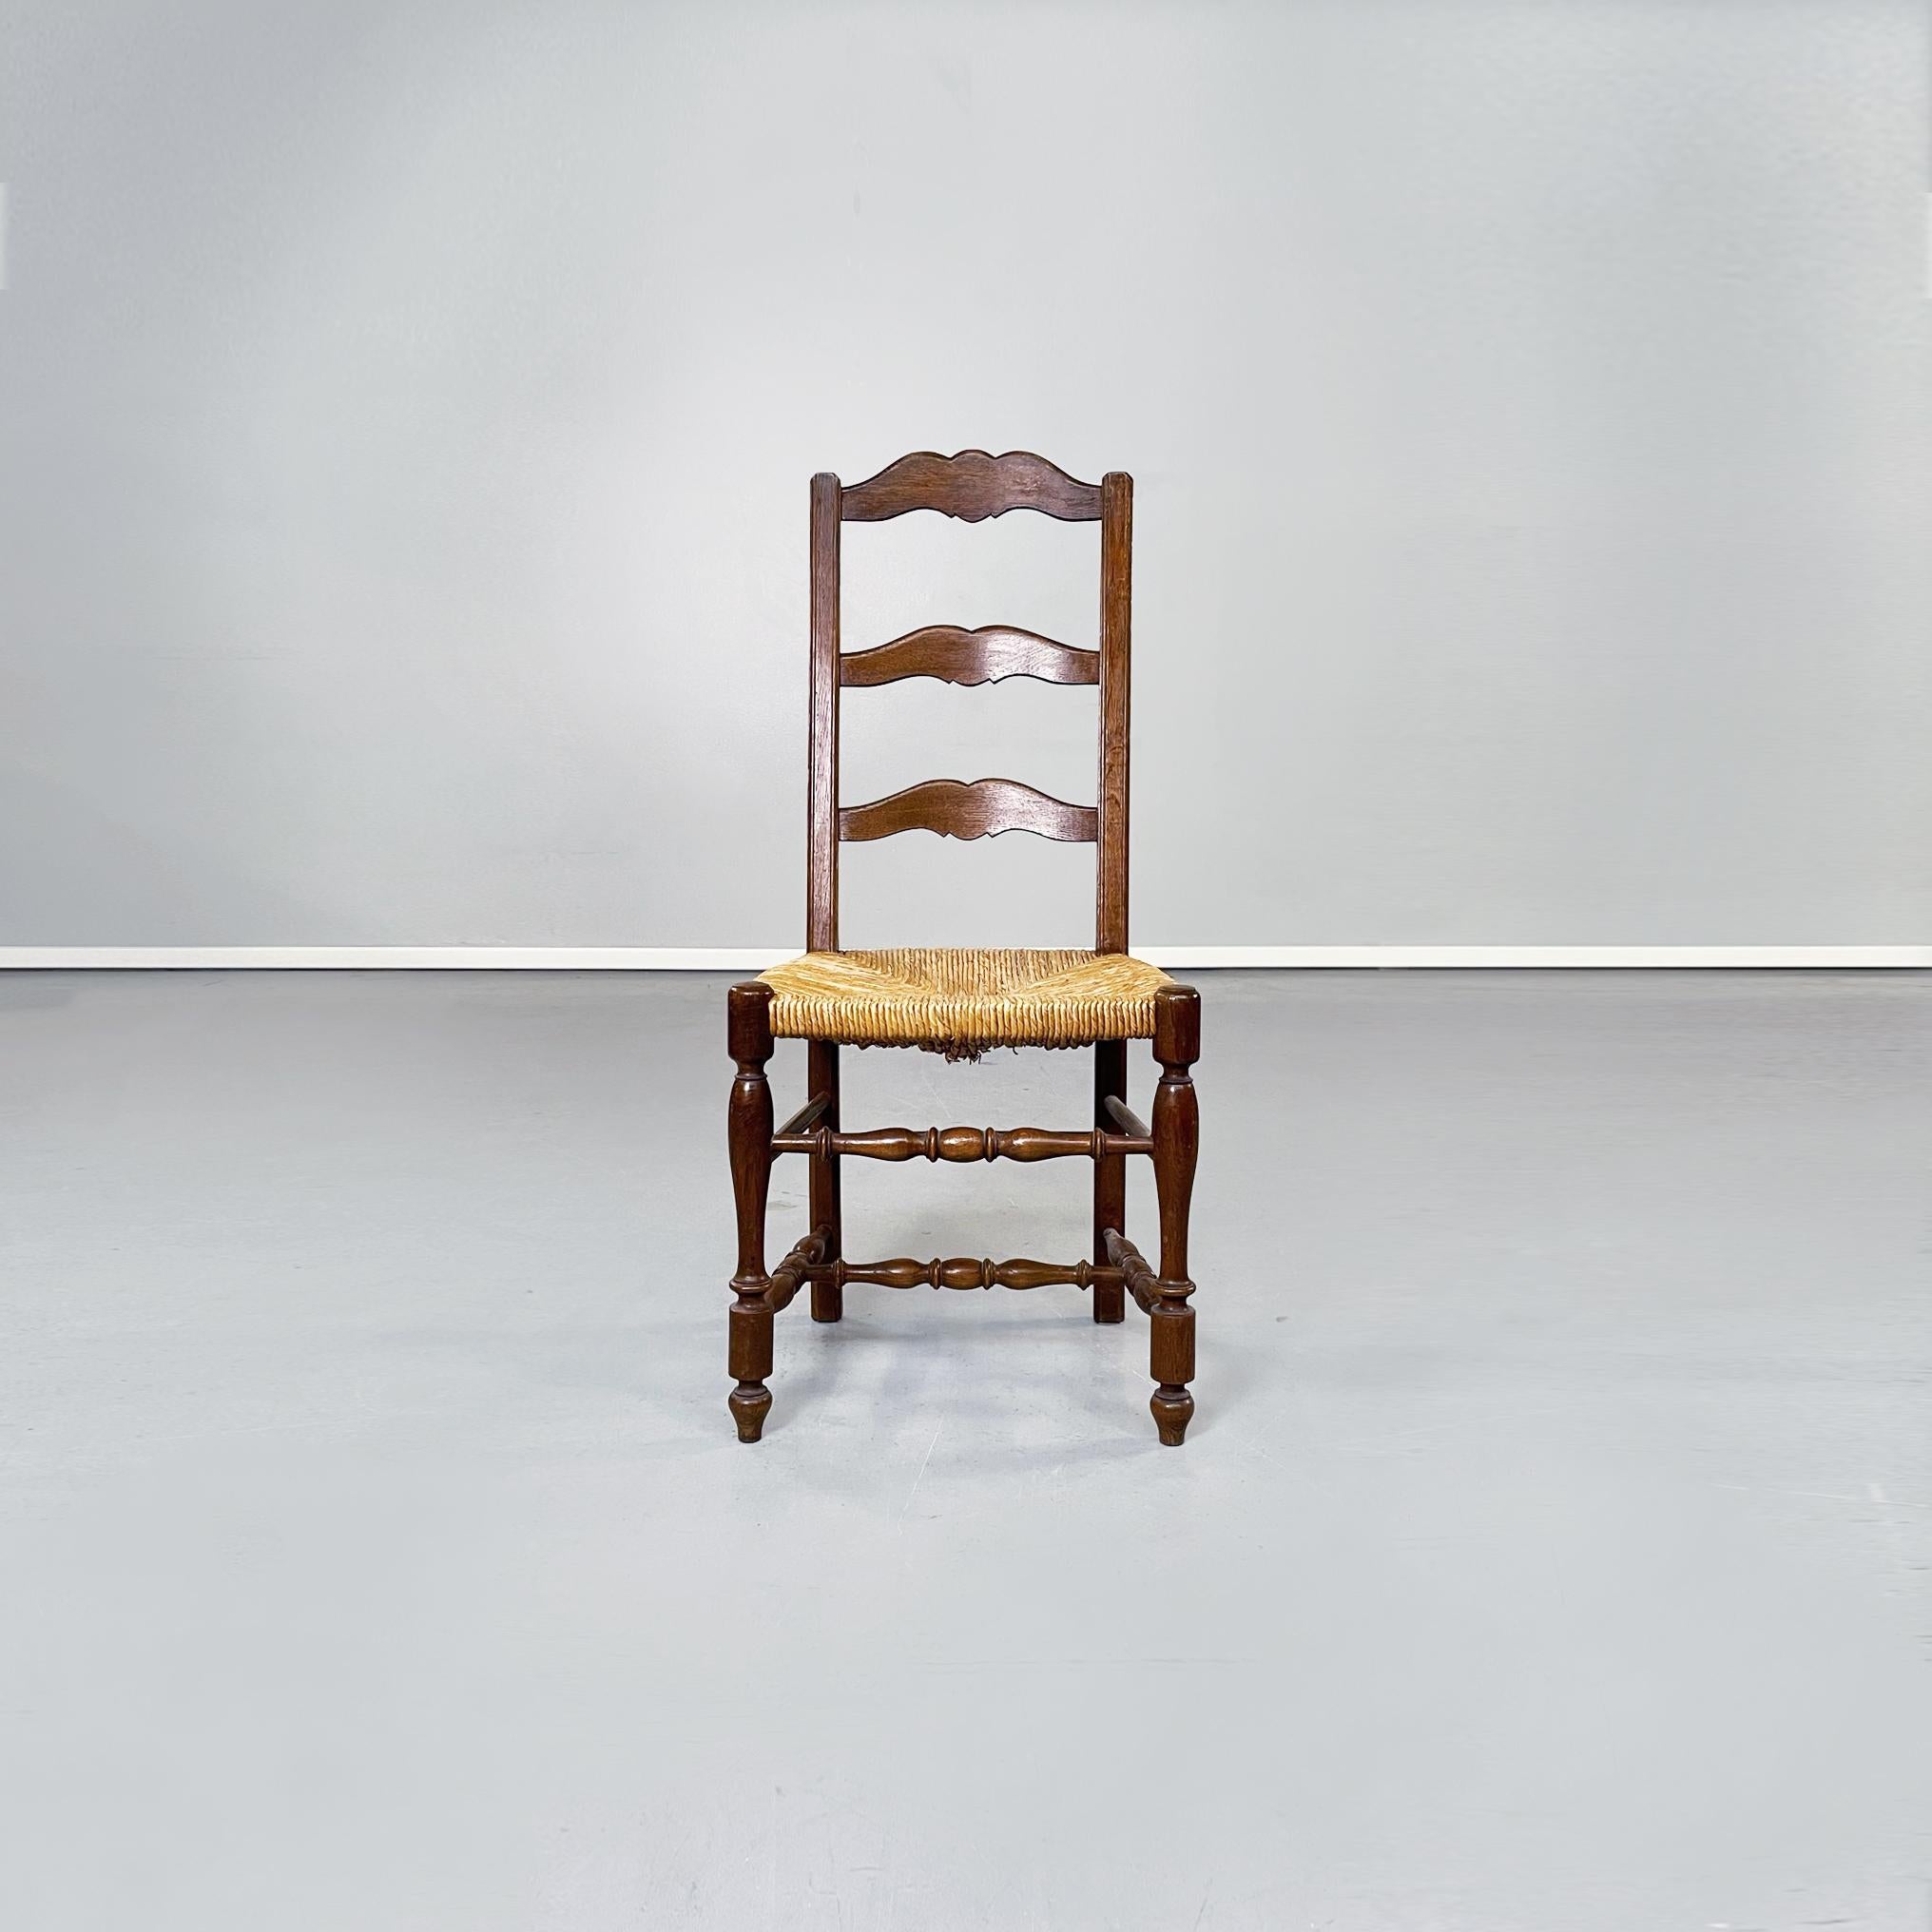 Italian nineteenth century Finely crafted wooden and straw chairs, late1800s
Set of six chairs with square straw seat and finely crafted structure in solid wood.
Late 1800s.
Very good conditions, slight signs of aging.
Measurements in cm